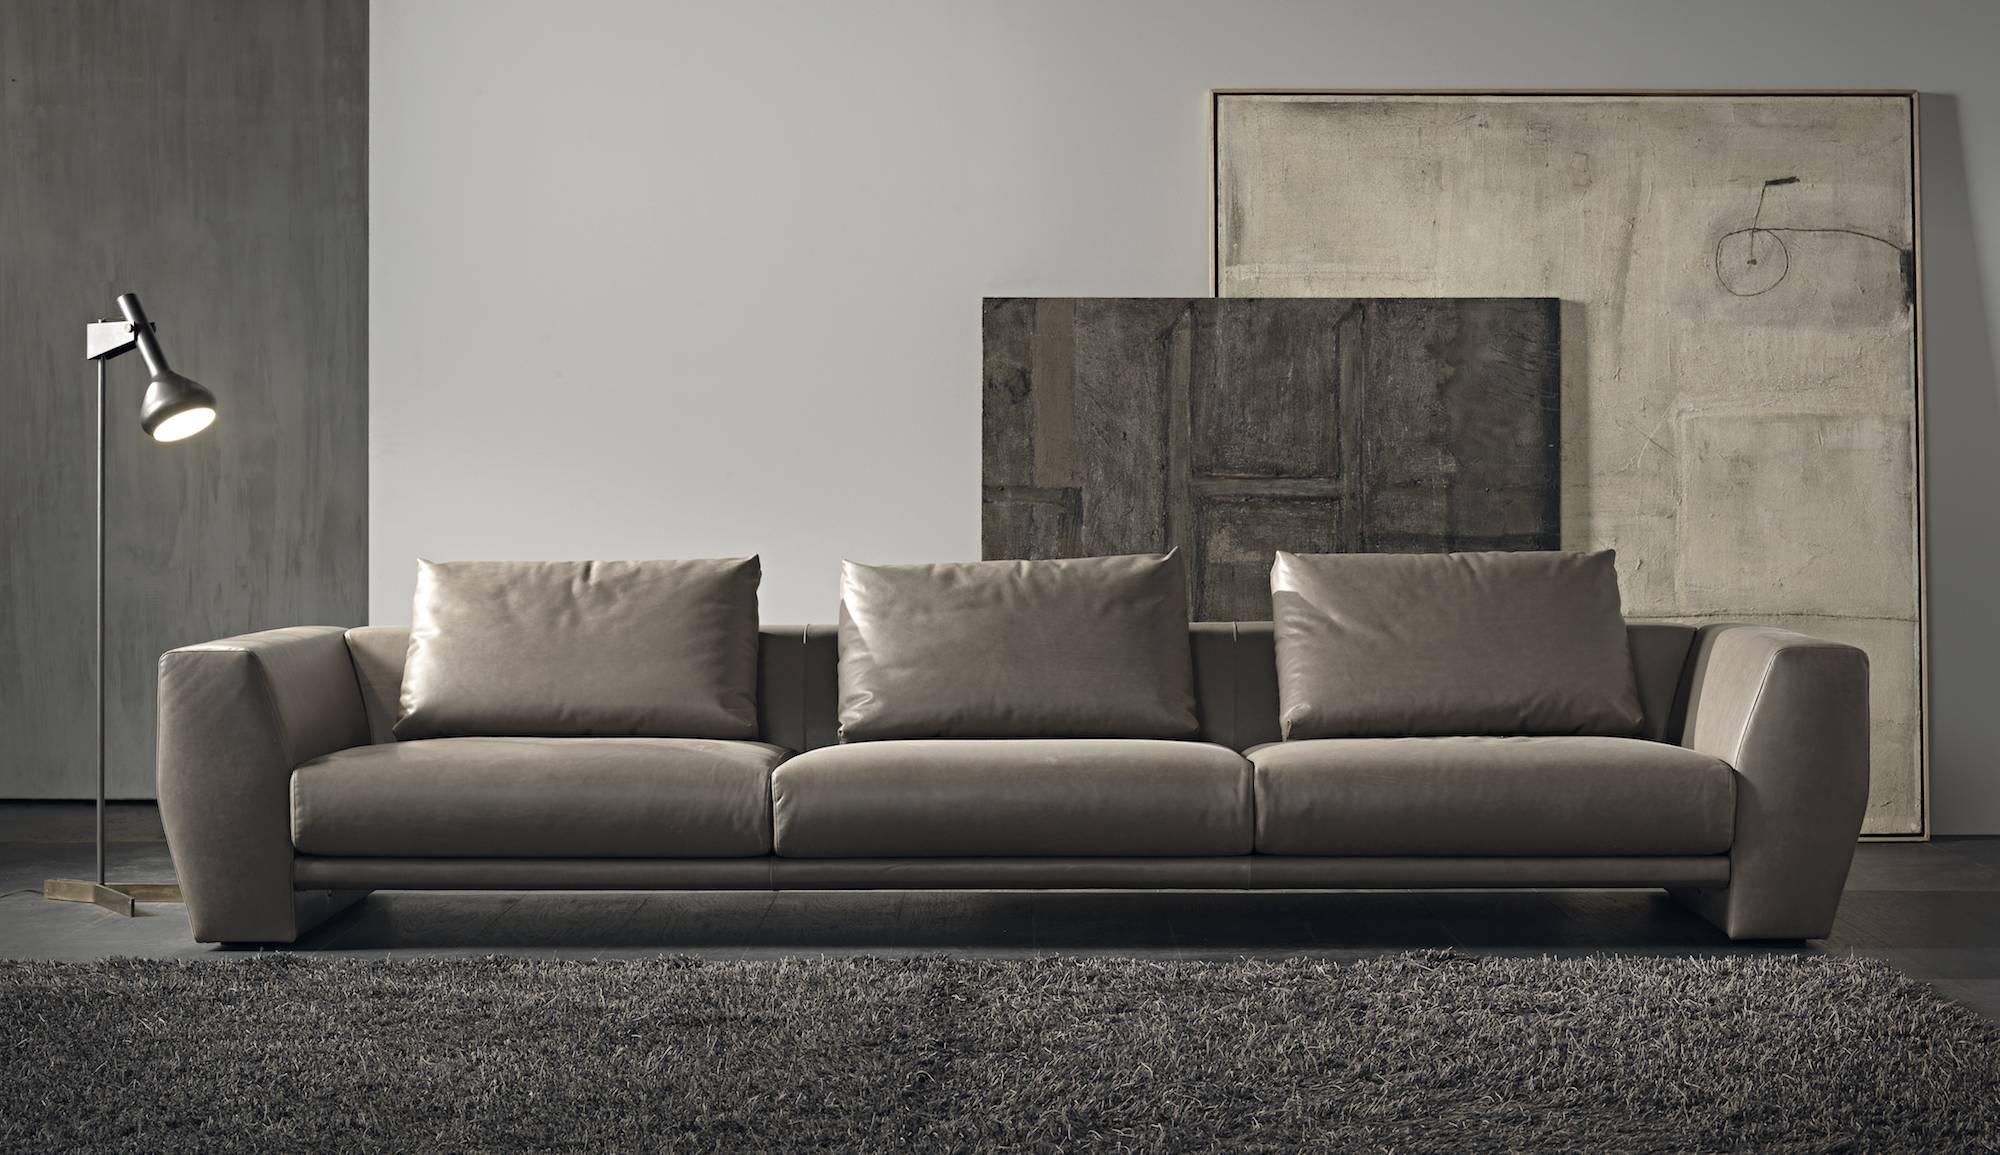 A sofa with a special bridge structure, slender and linear, that reveals and enhances the decisive forms and the pronounced volumes of the weight-bearing arms, giving an unusual shape to comfort, strictly in leather. The low back creates an unusual